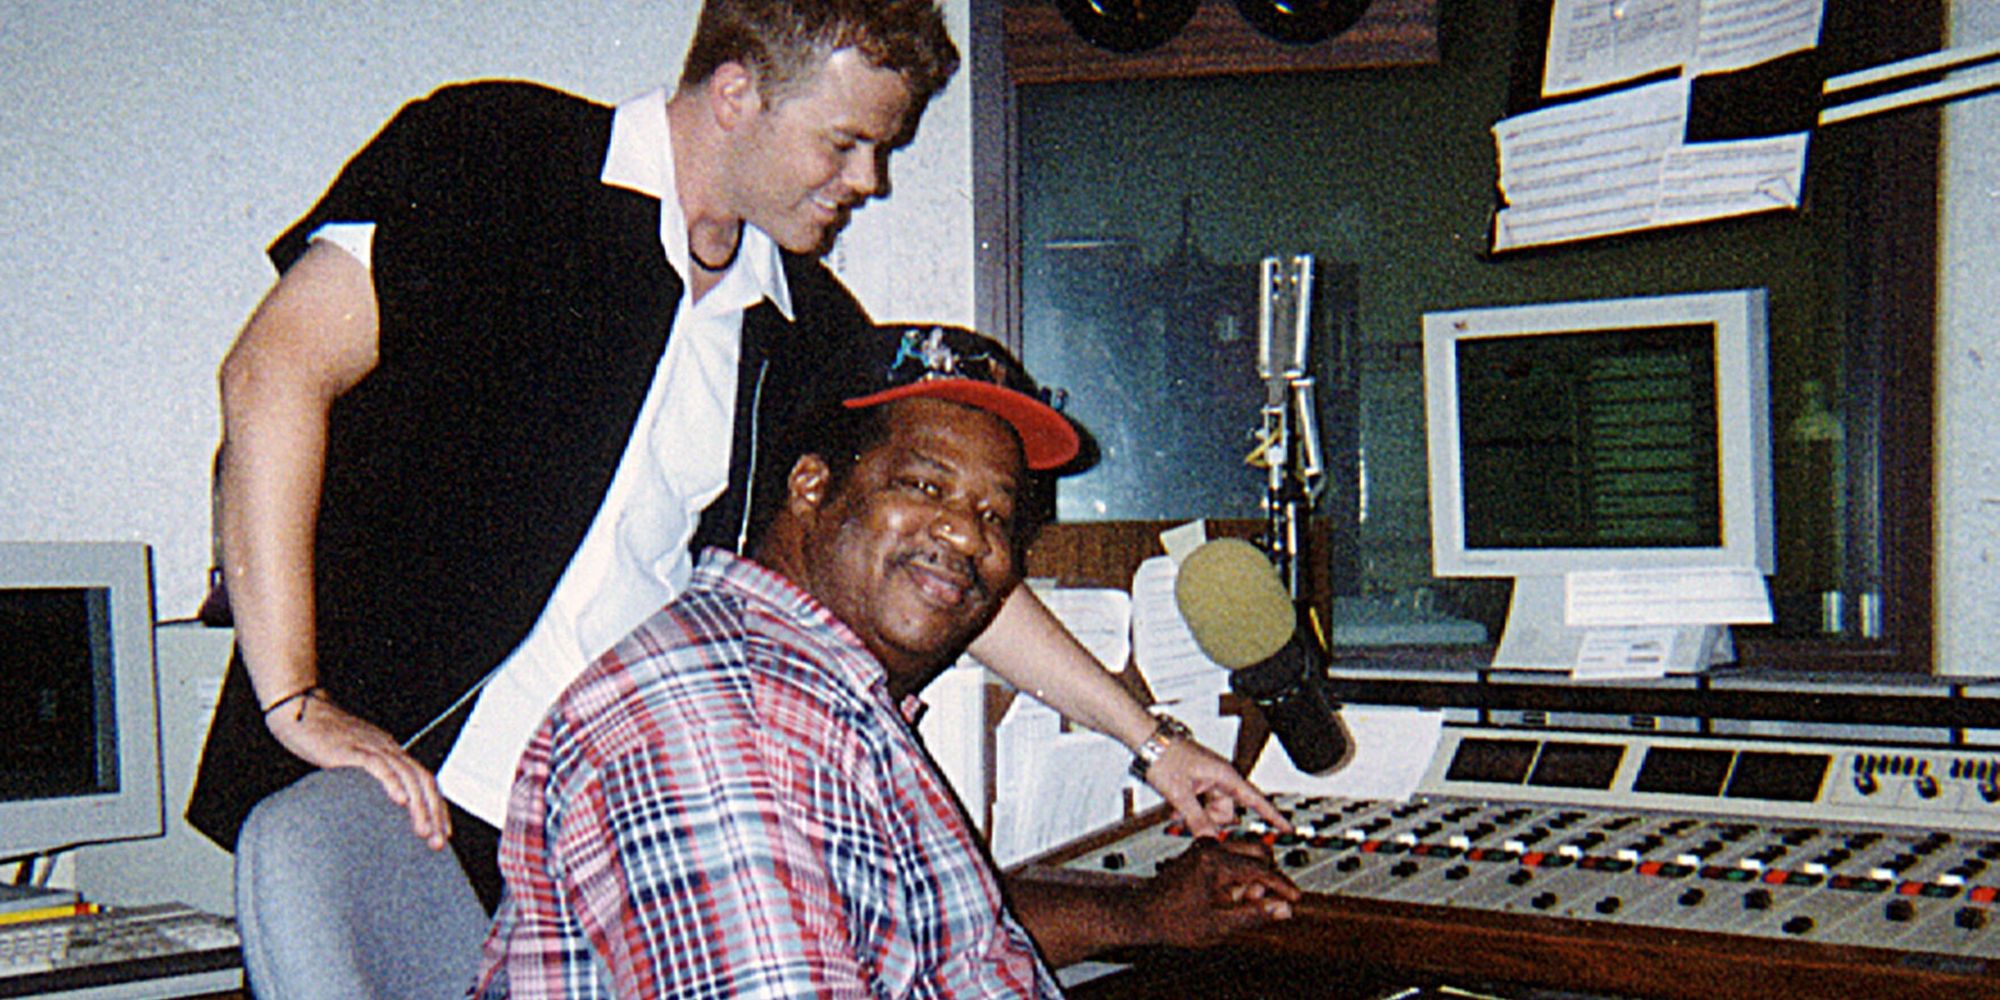 Jerry Lawson sitting in front of a microphone